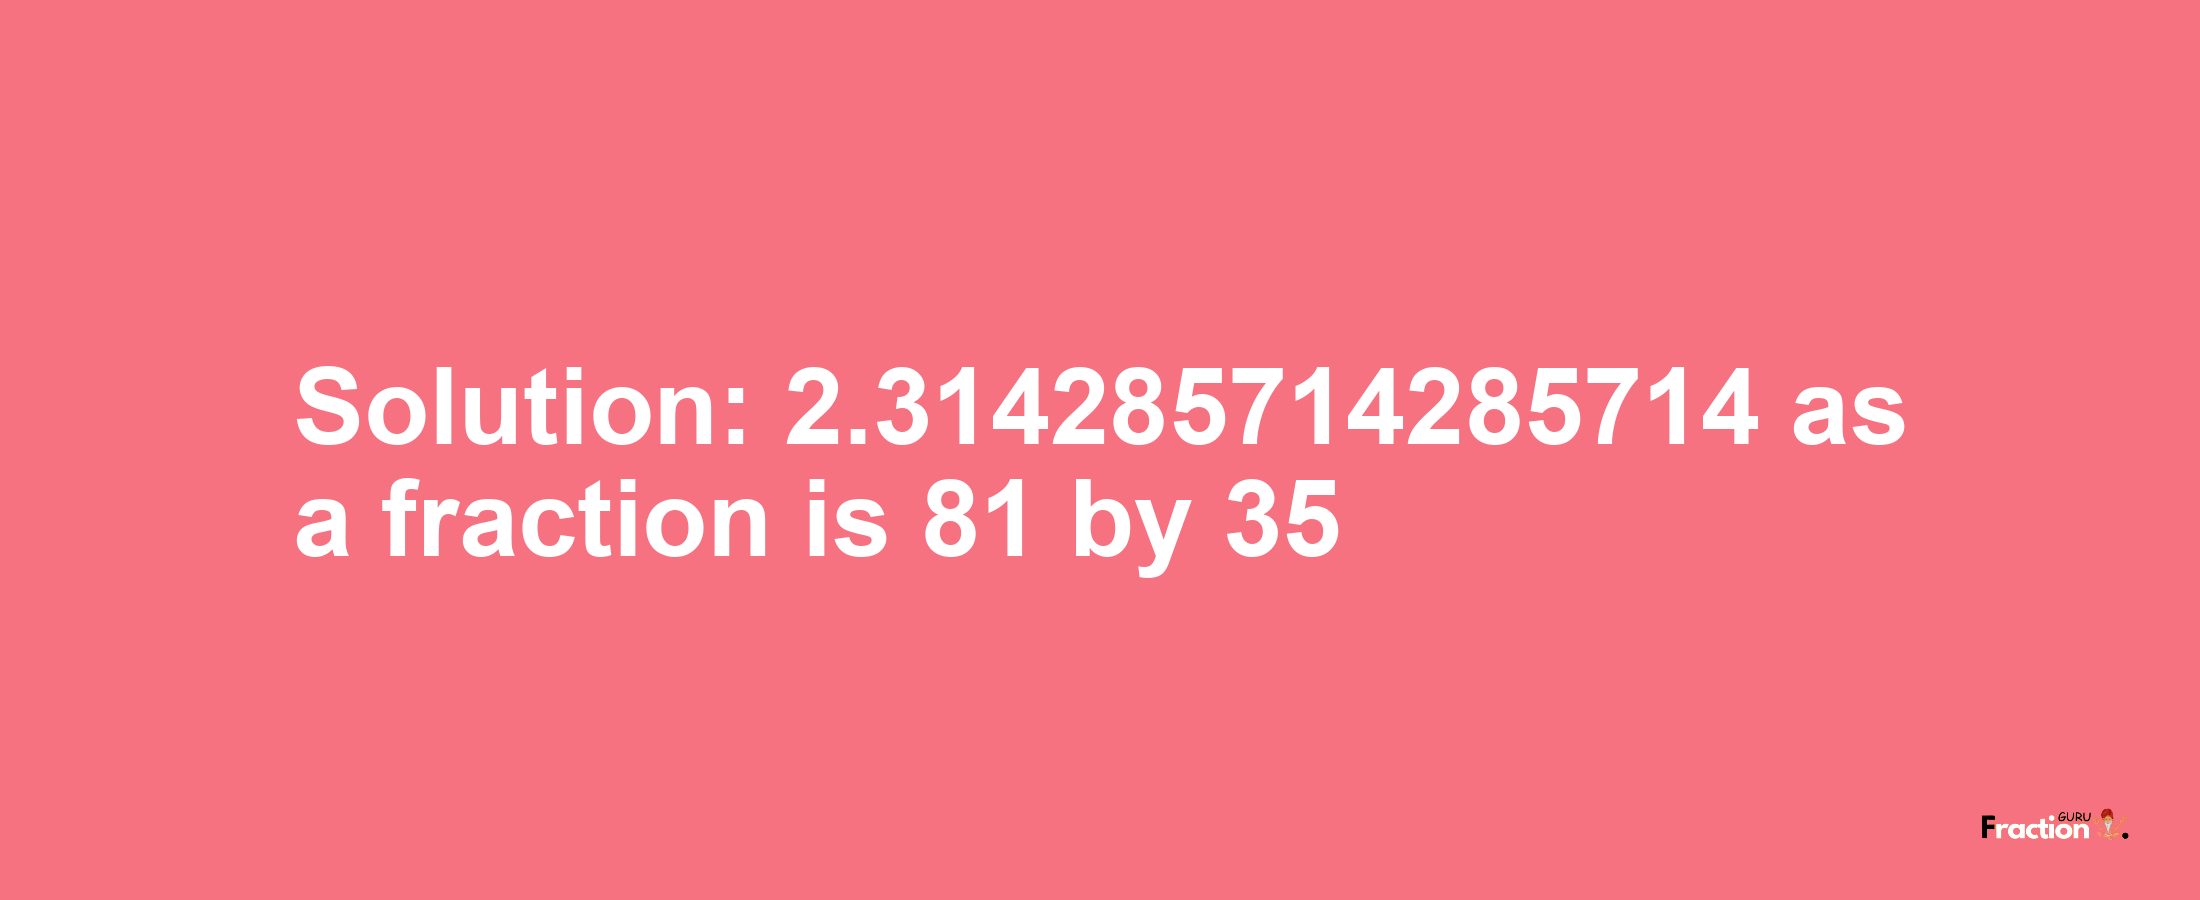 Solution:2.314285714285714 as a fraction is 81/35